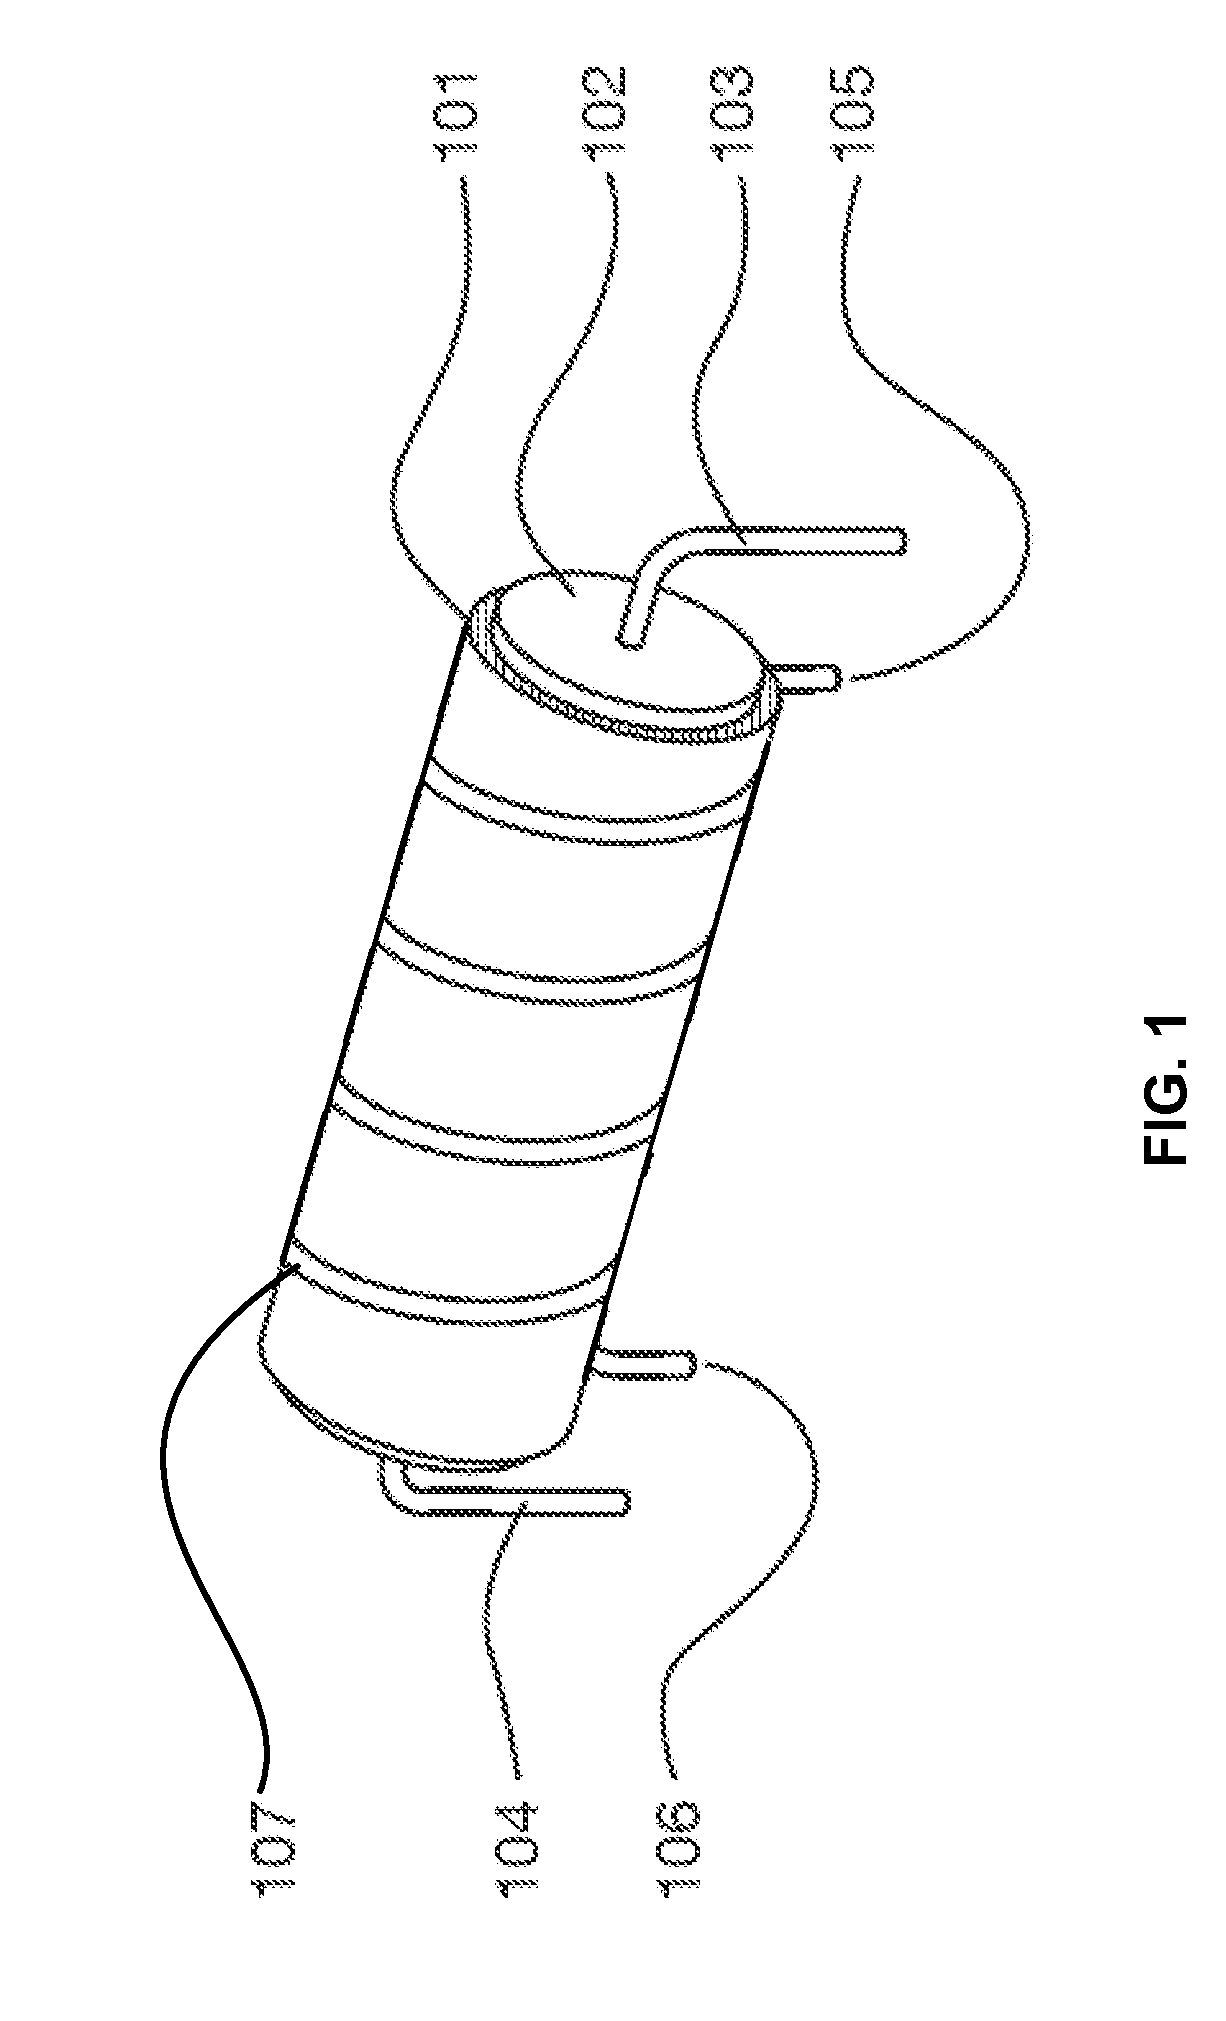 Method and Apparatus for an Integrated Antenna